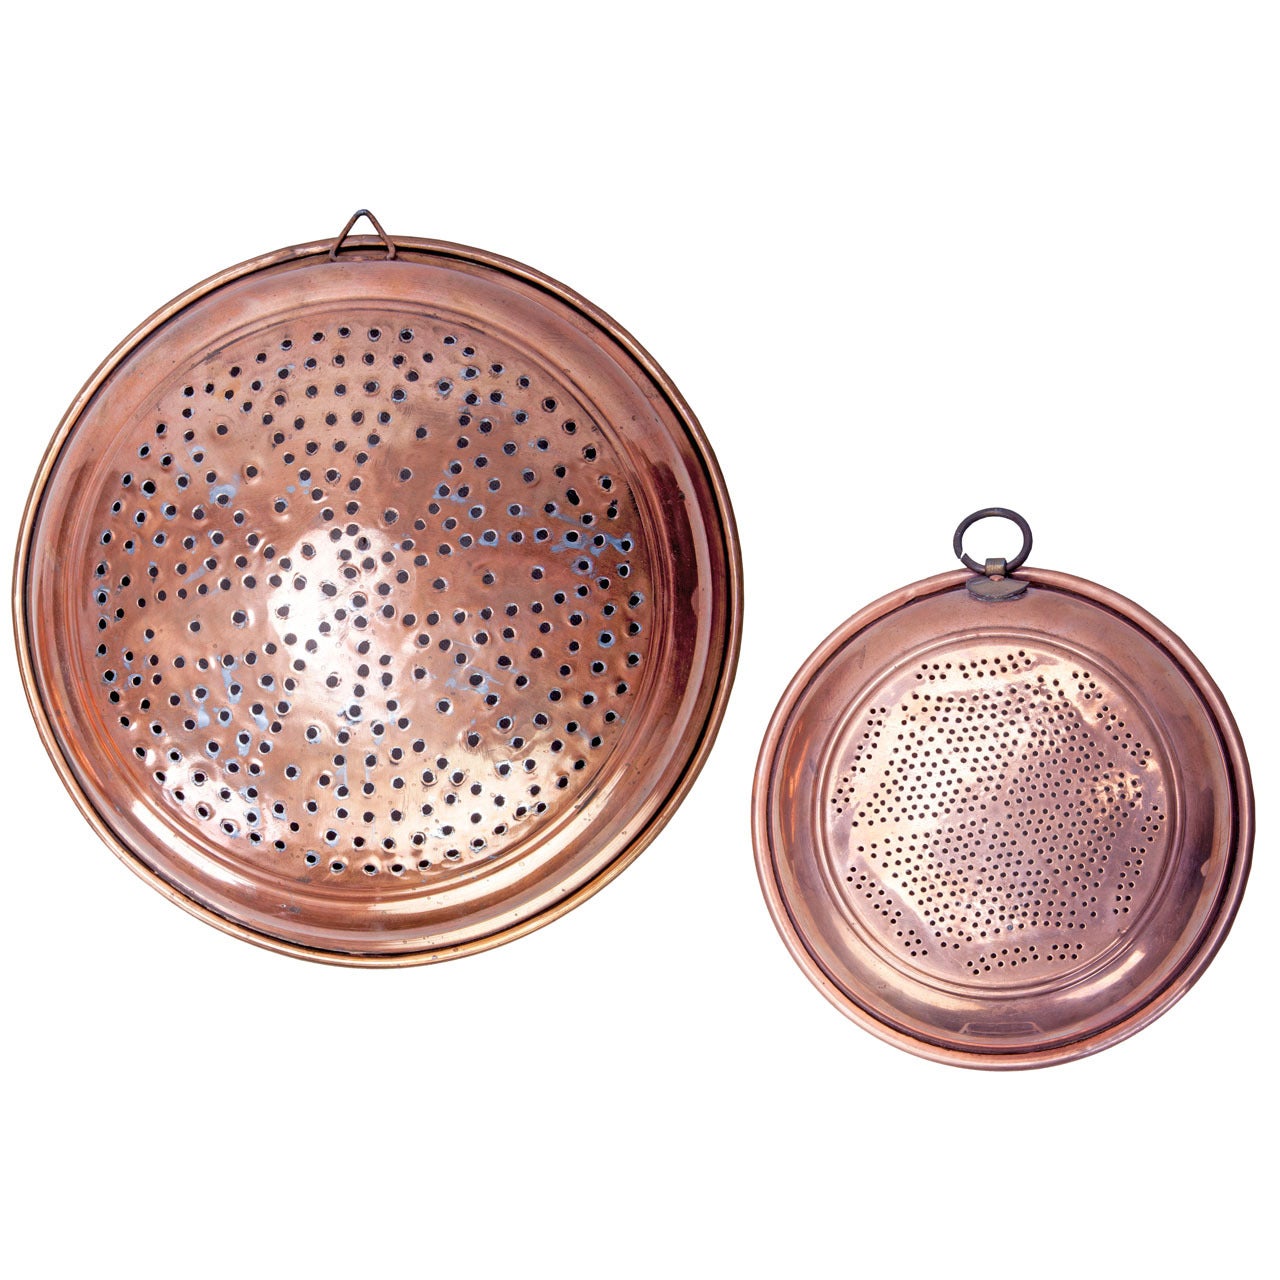 Turn of the Century Copper Strainers For Sale